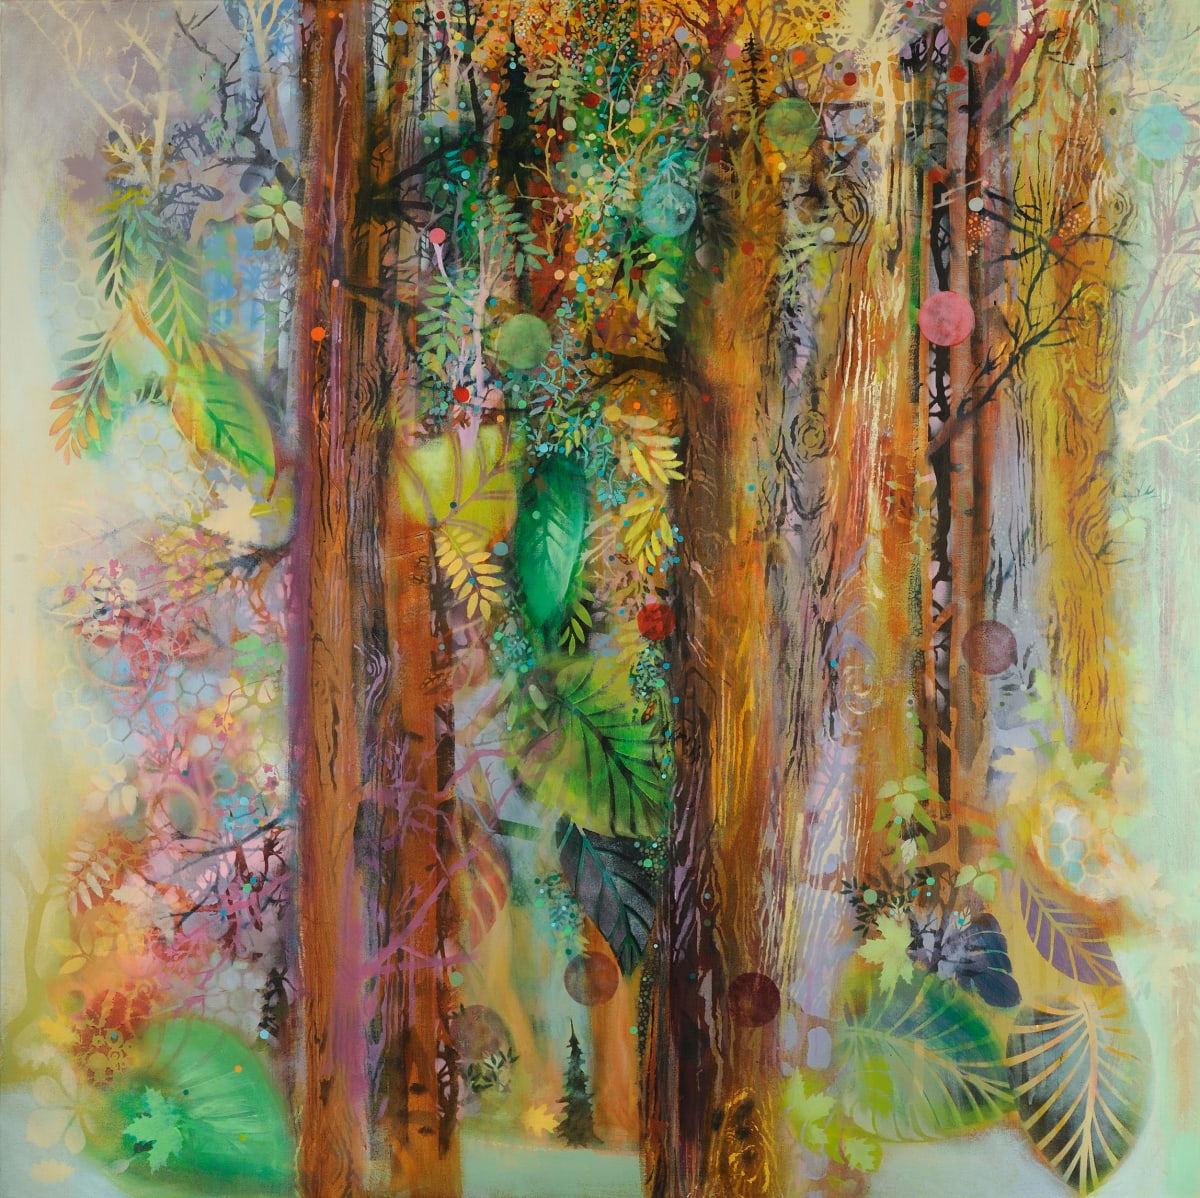 Wood Wind by Pat Goslee  Image: In "Wood Wind" the viewer sees a crepuscular light through the trees on a Rock Creek trail that brings to mind Deep Time, the importance of old growth forests and Native American Peace Trees.
